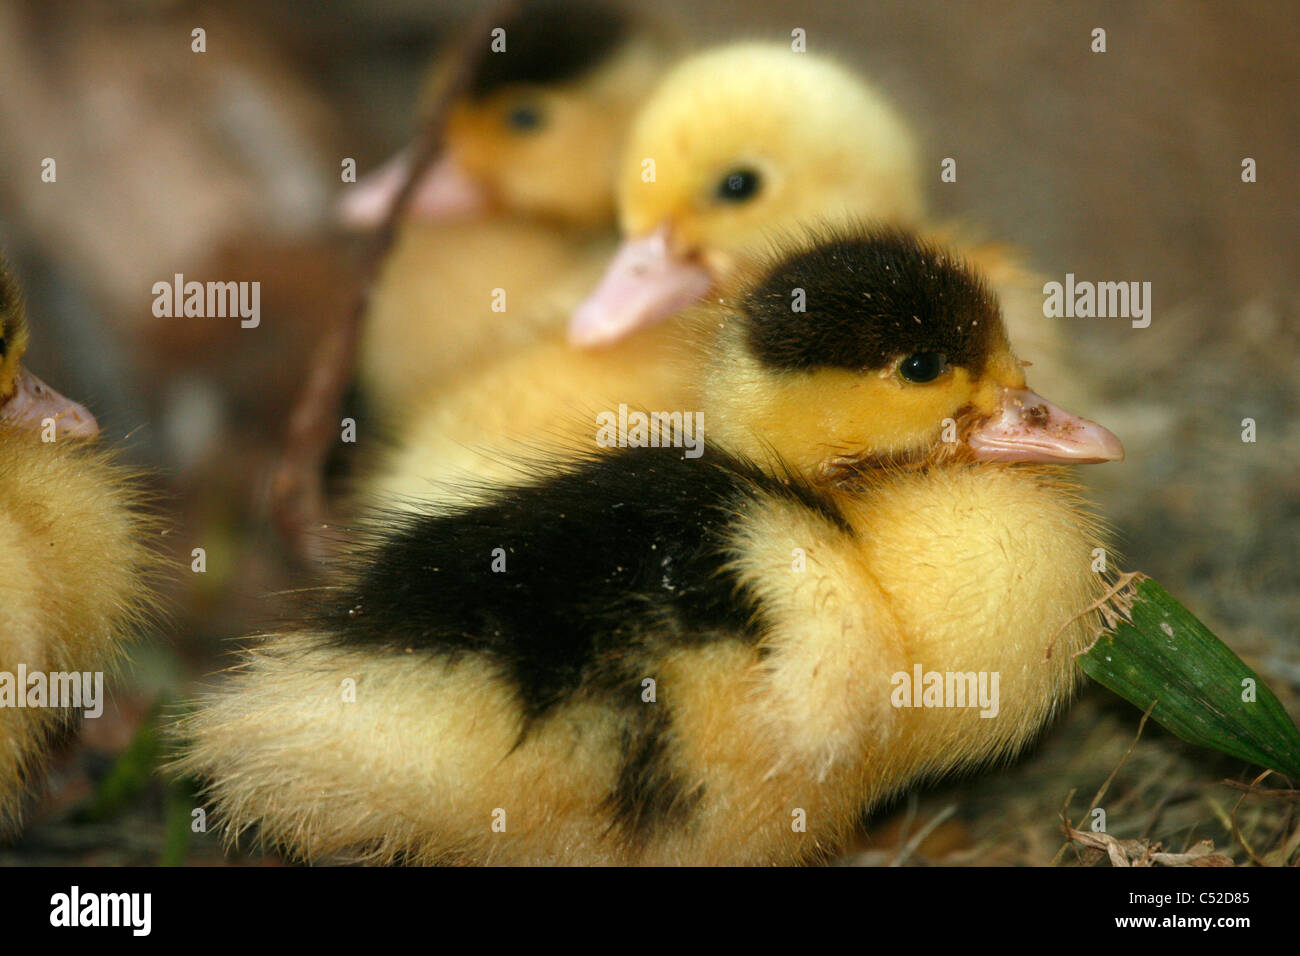 Young Muscovy ducklings (Cairina moschata) Stock Photo